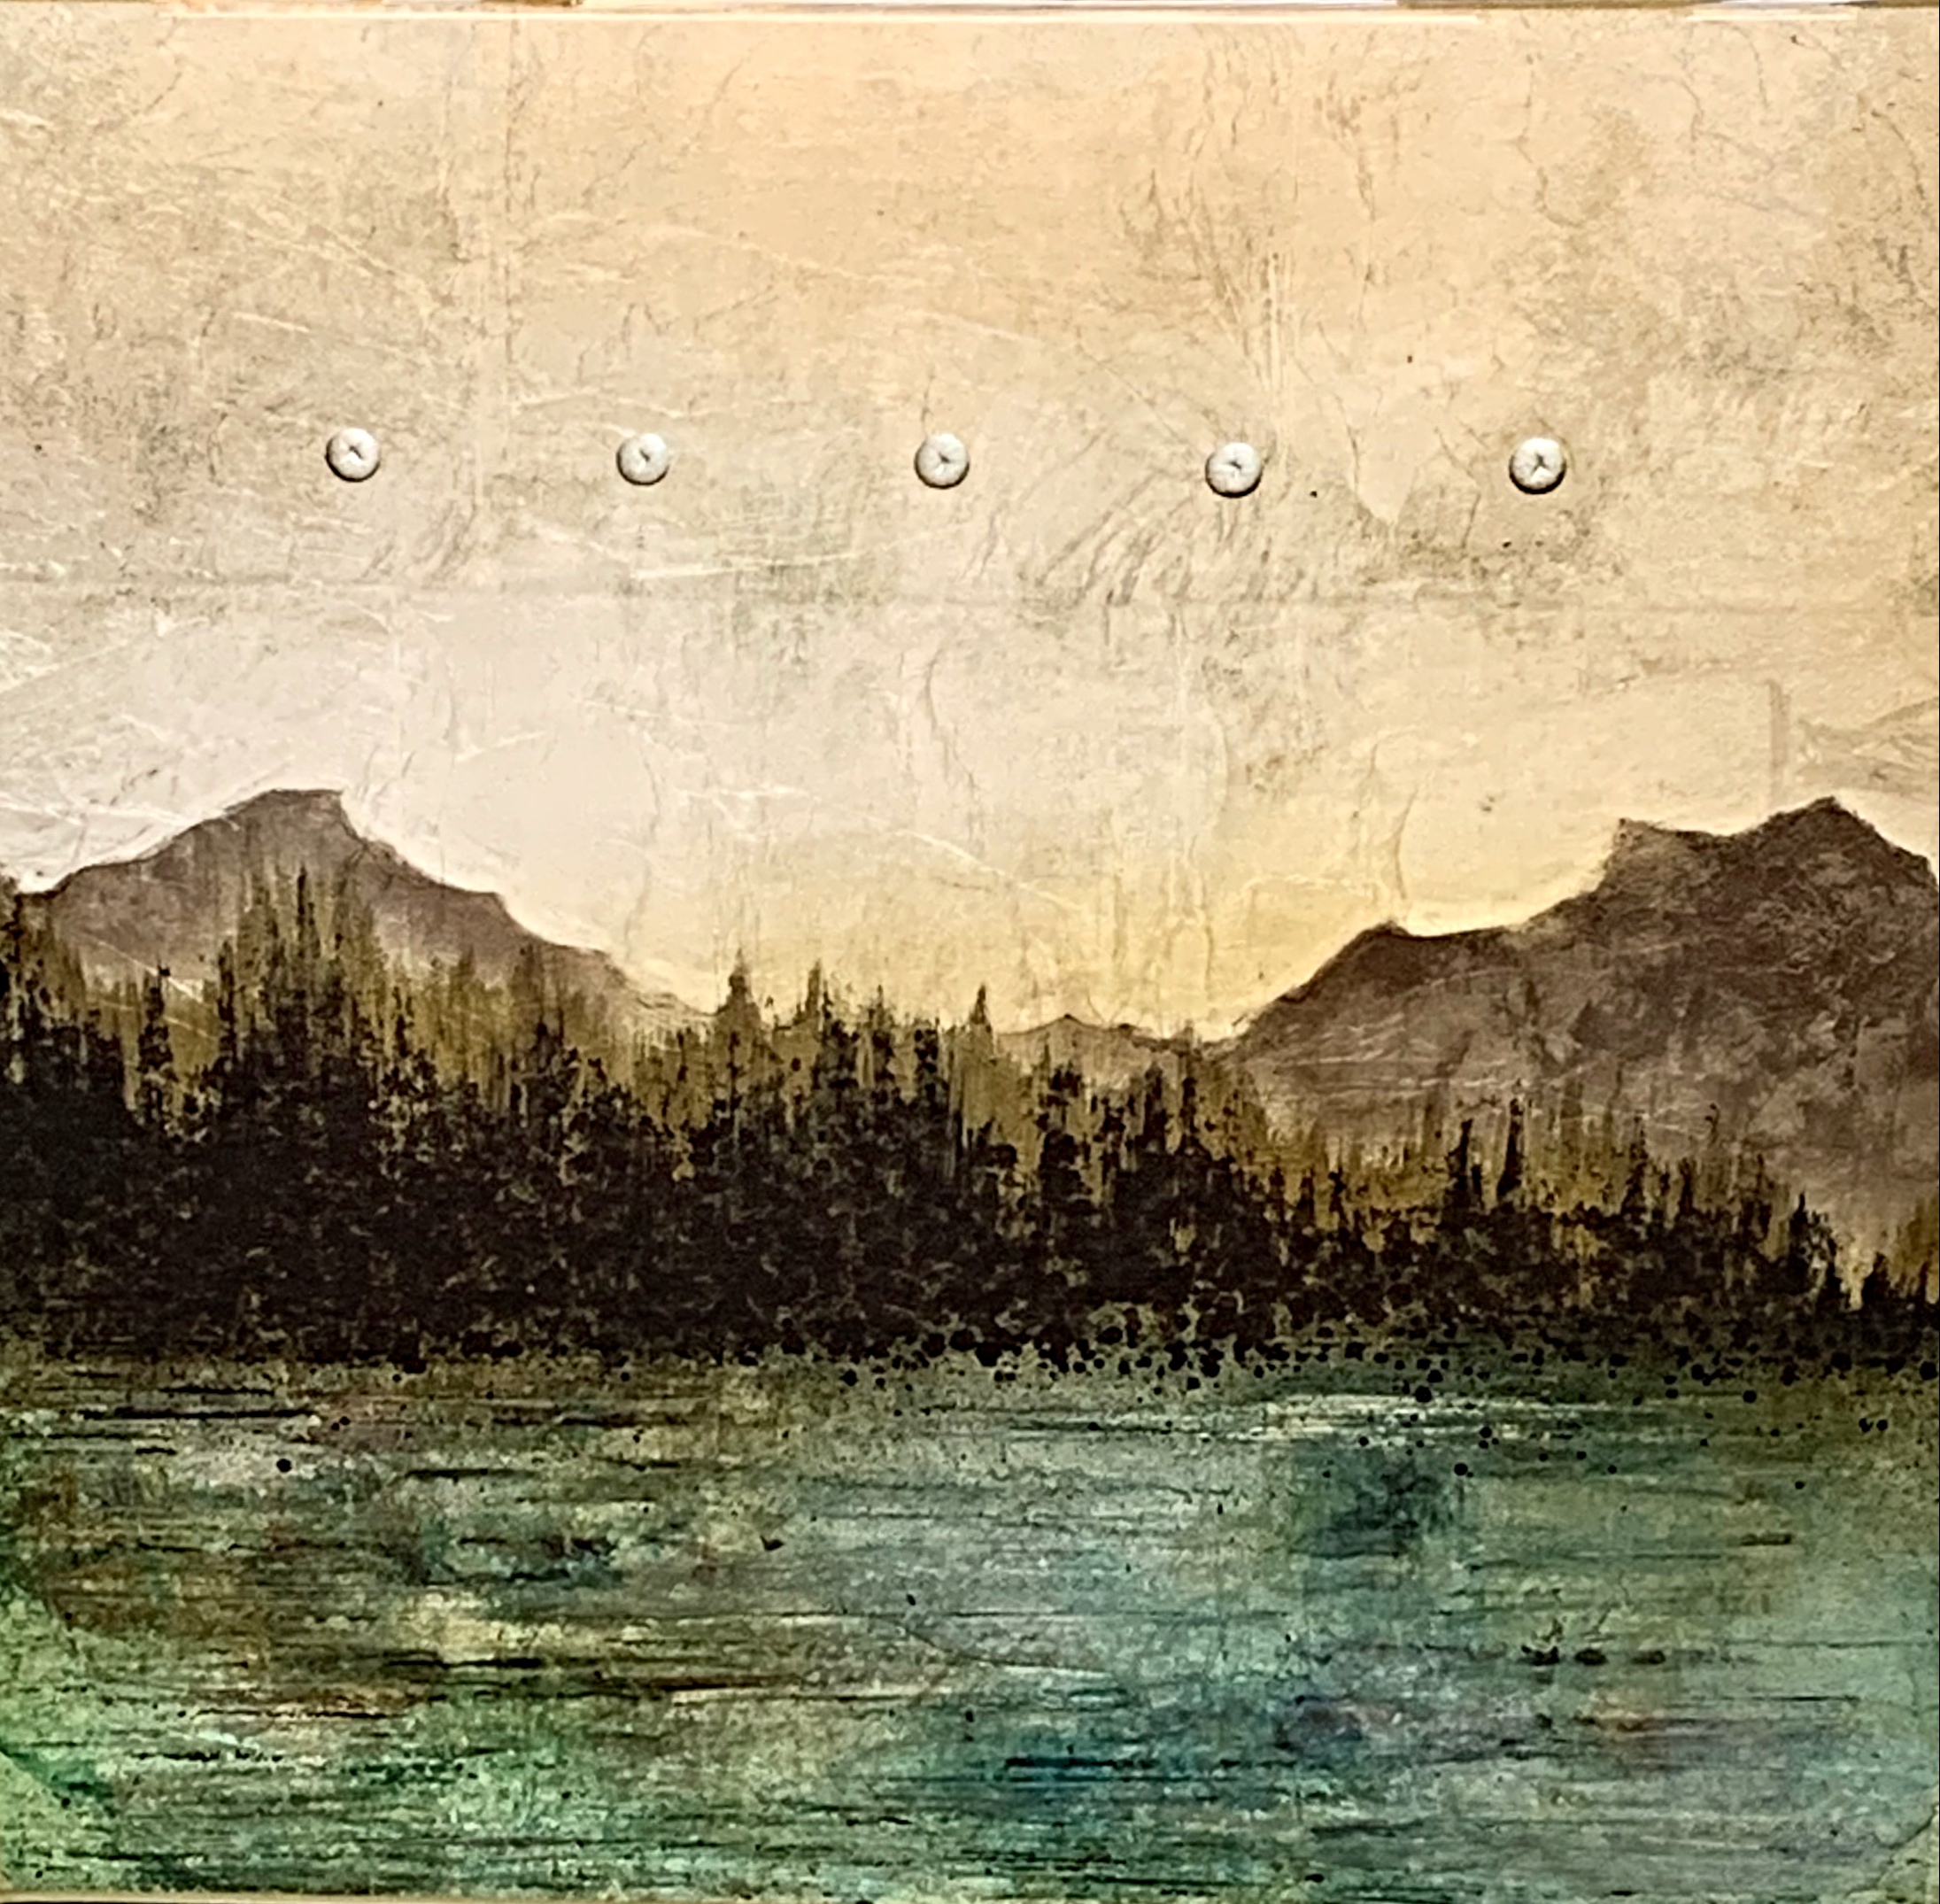 15-6, mixed media landscape painting by David Graff | Effusion Art Gallery + Cast Glass Studio, Invermere BC